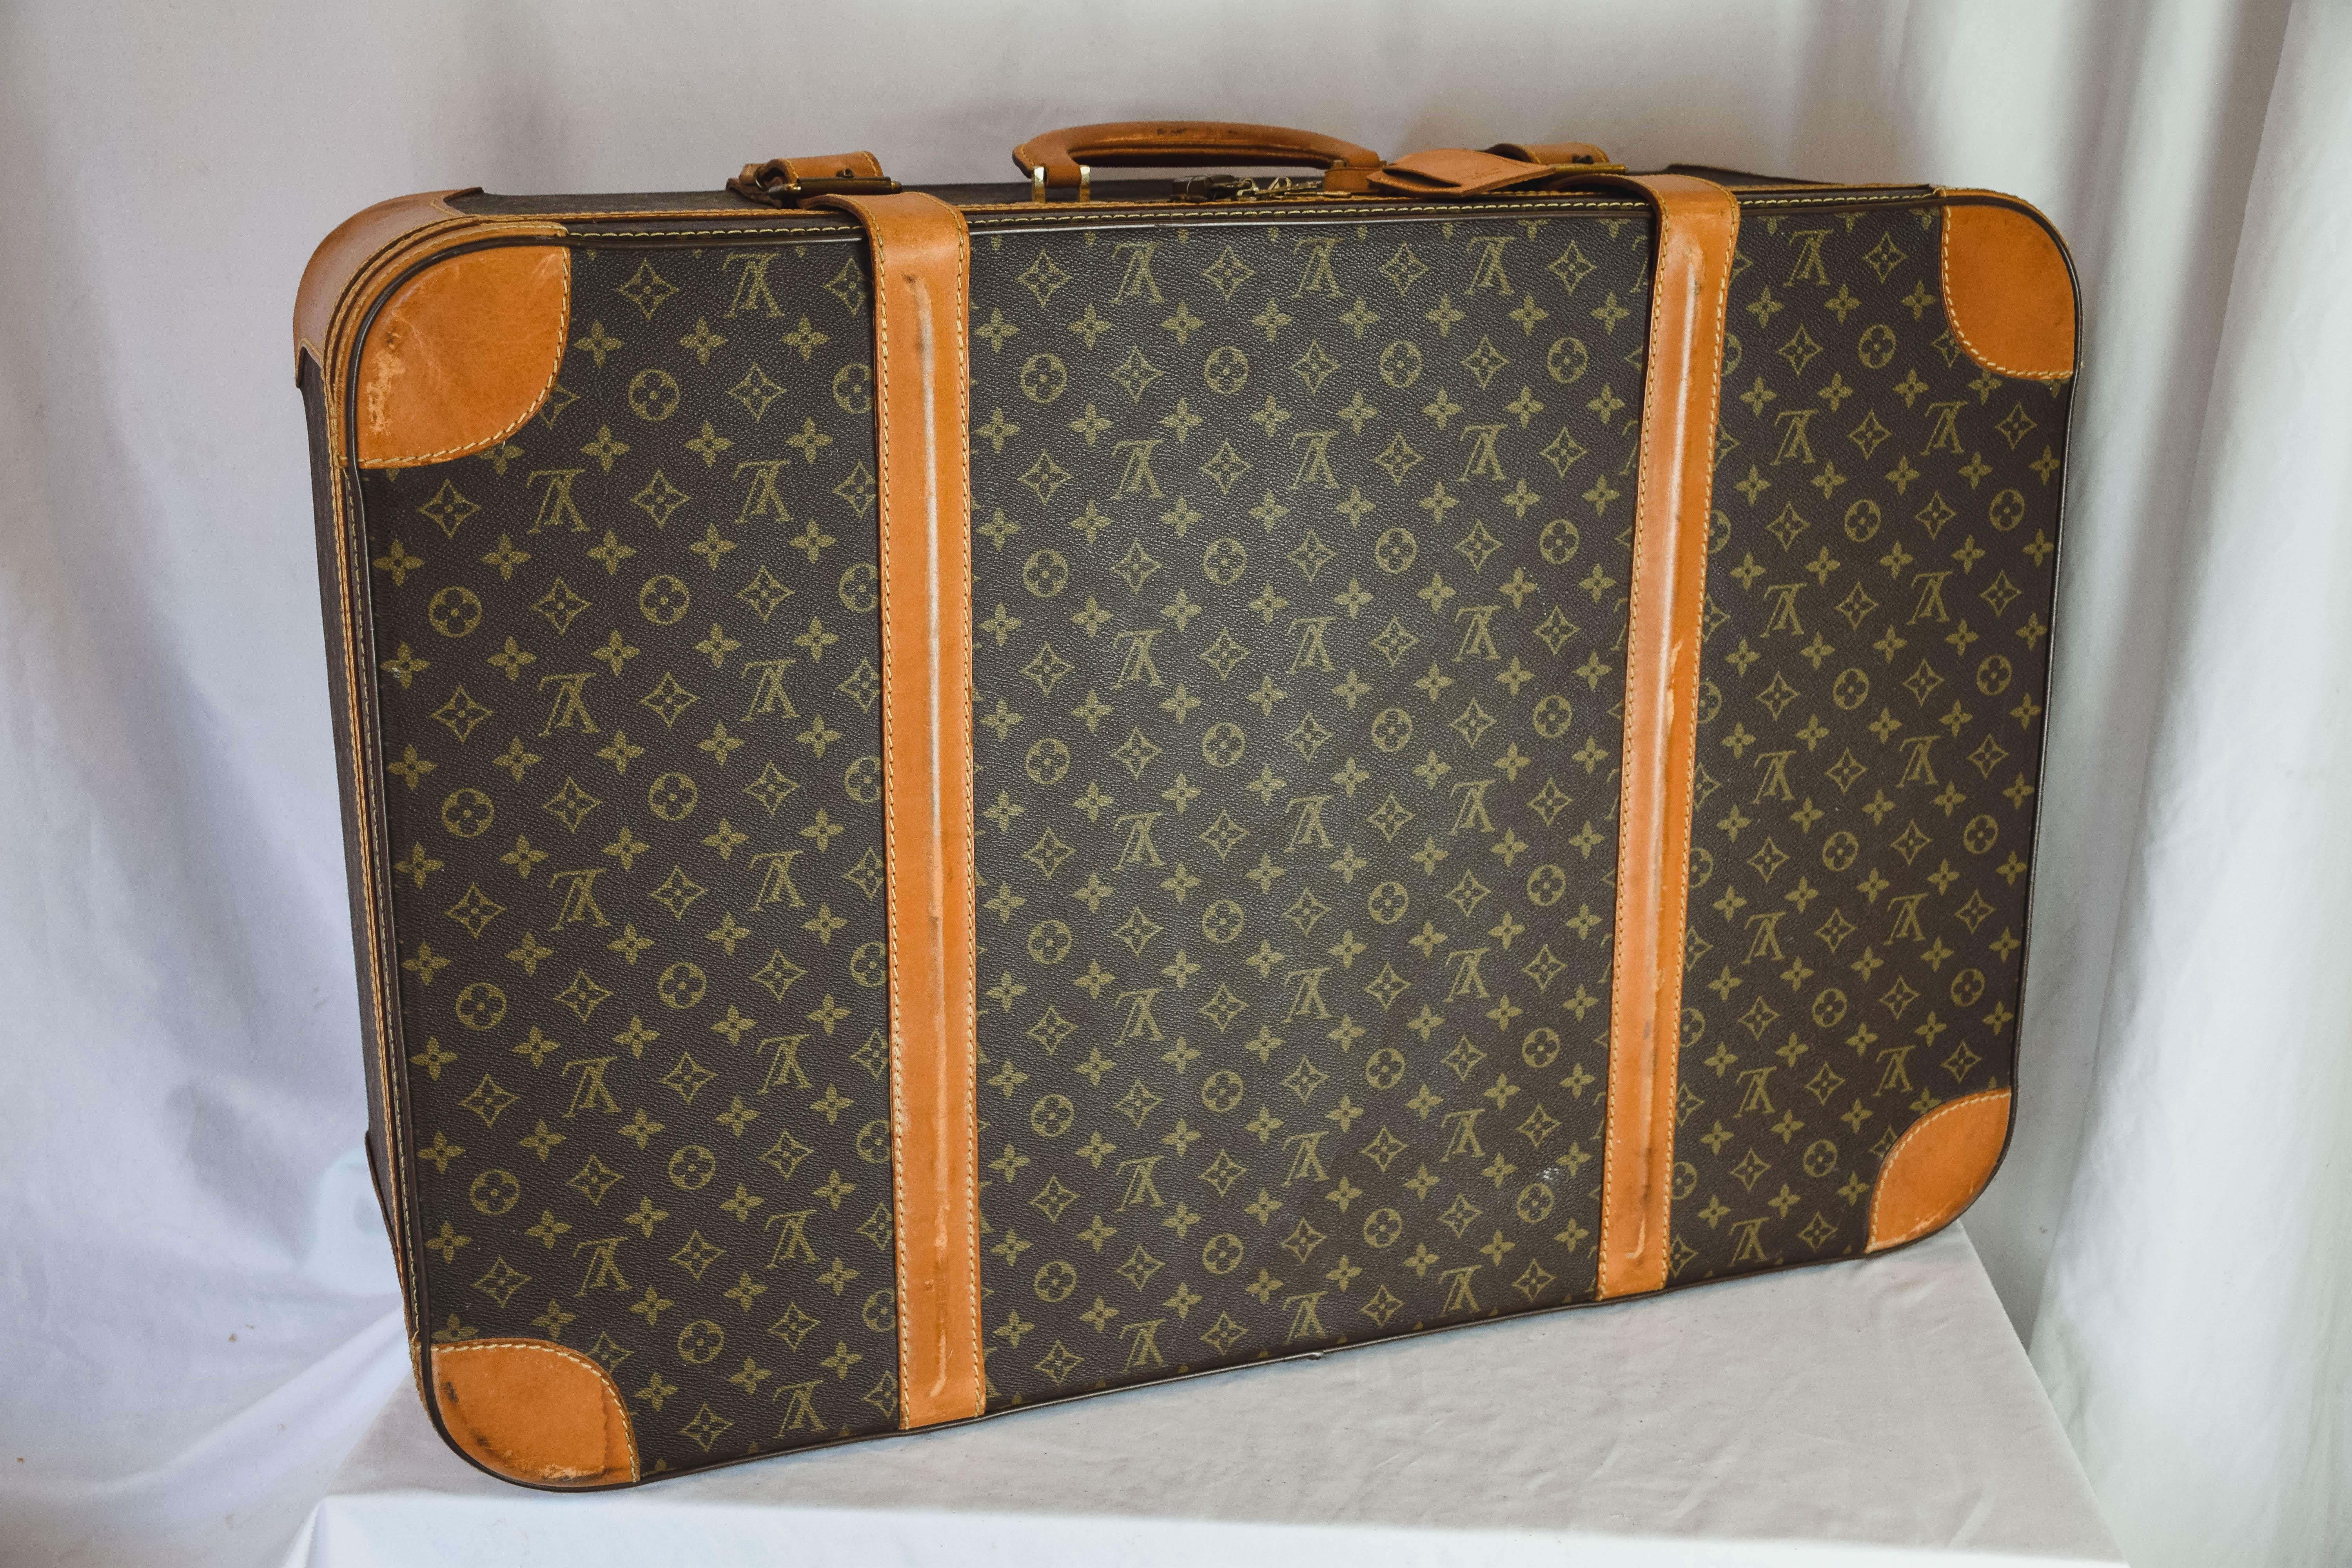 A vintage Louis Vuitton brown and beige leather and canvas monogram hold all luggage. This beautiful luggage features a round top handle and buckle fastenings. The inside is in good condition and has two side pockets and also a buckle